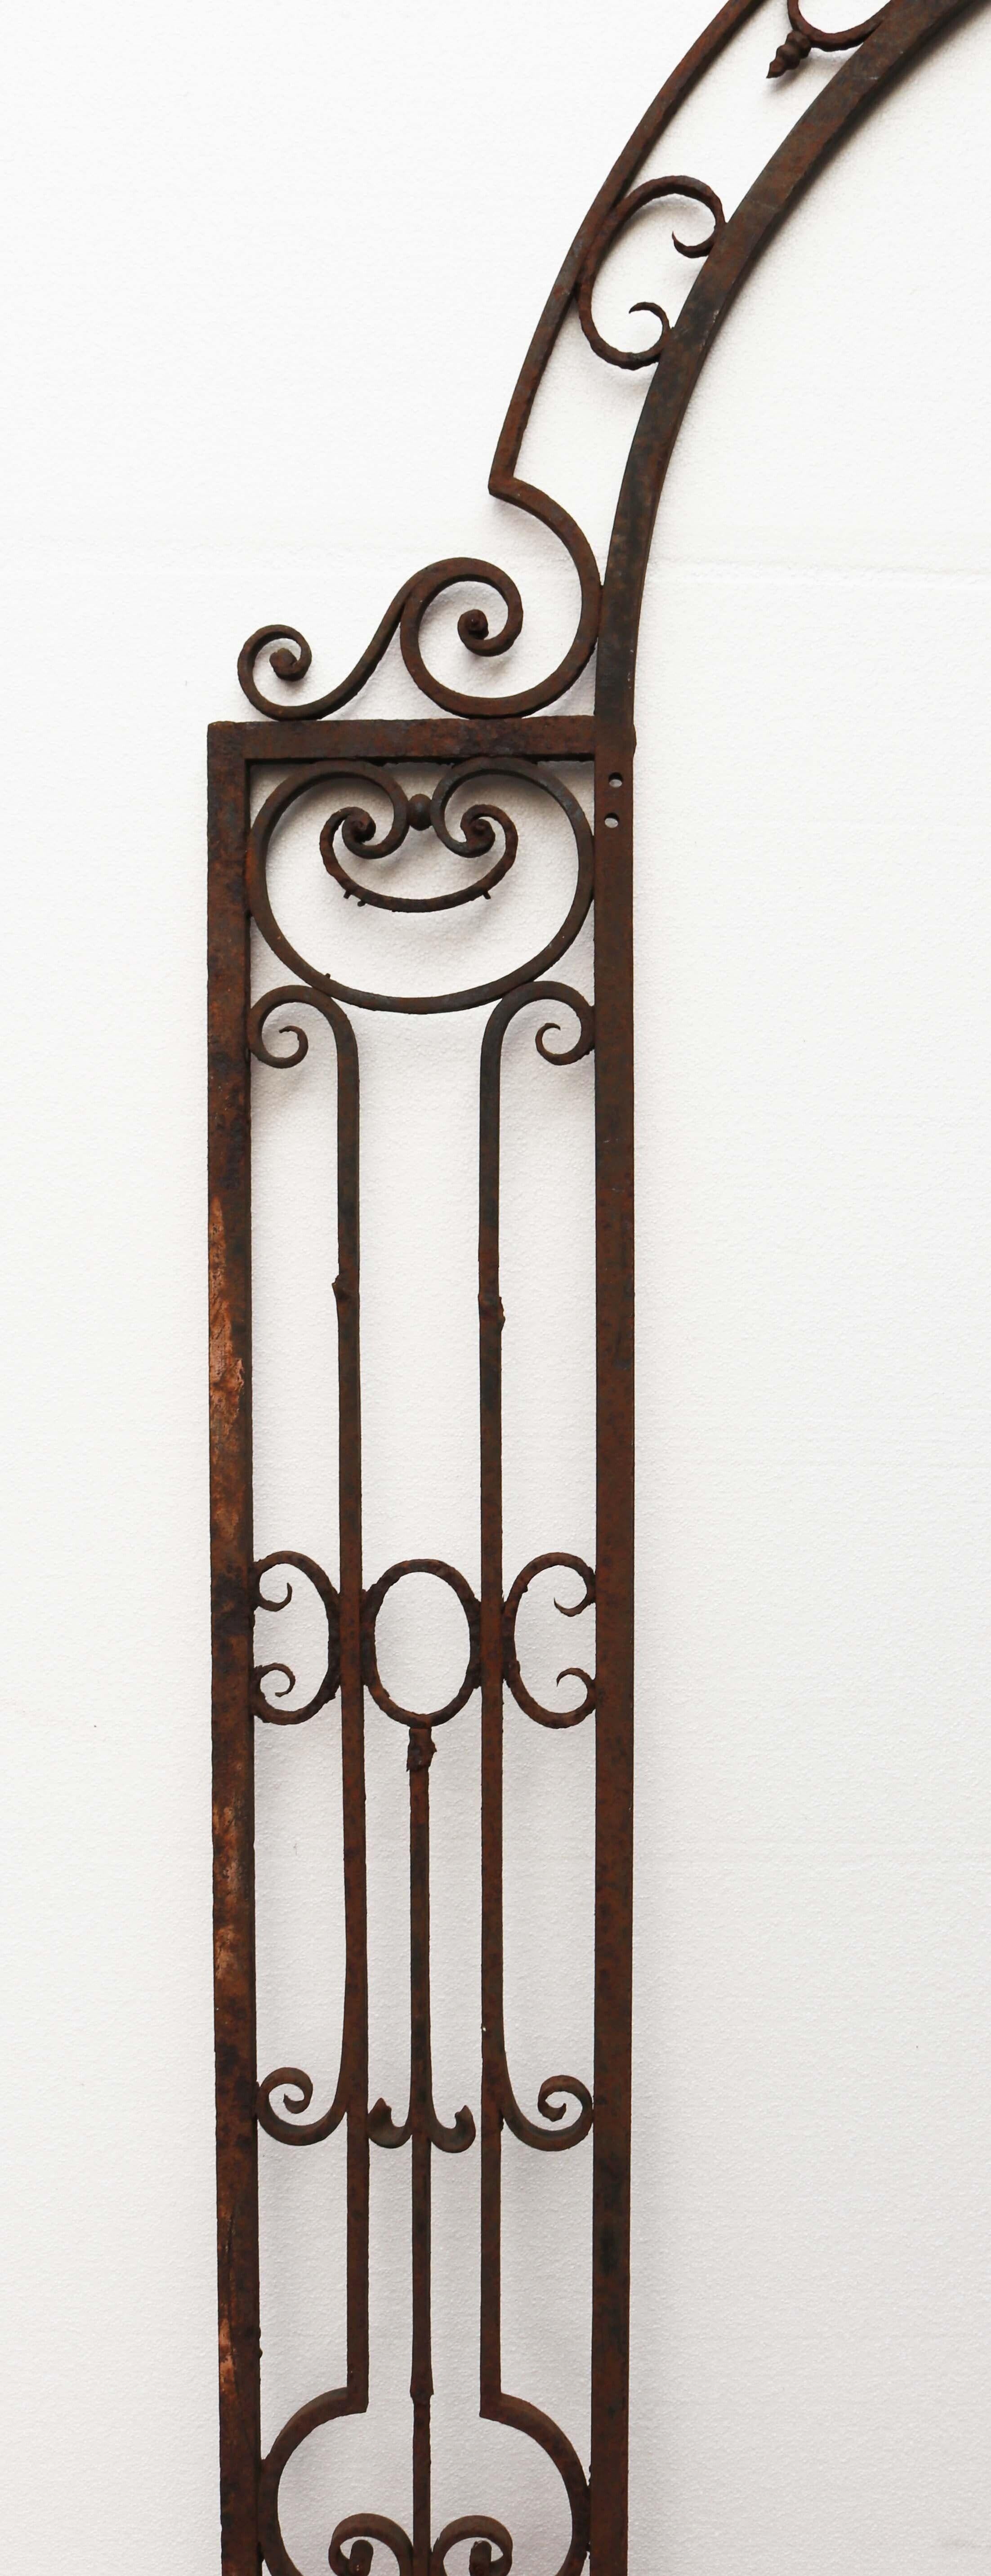 Georgian wrought iron garden archway. A Georgian and Regency style, iron archway with decorative reticulated scrollwork panels.



Additional Dimensions

Opening height of approx. 205 cm

Opening width of approx. 127 cm.